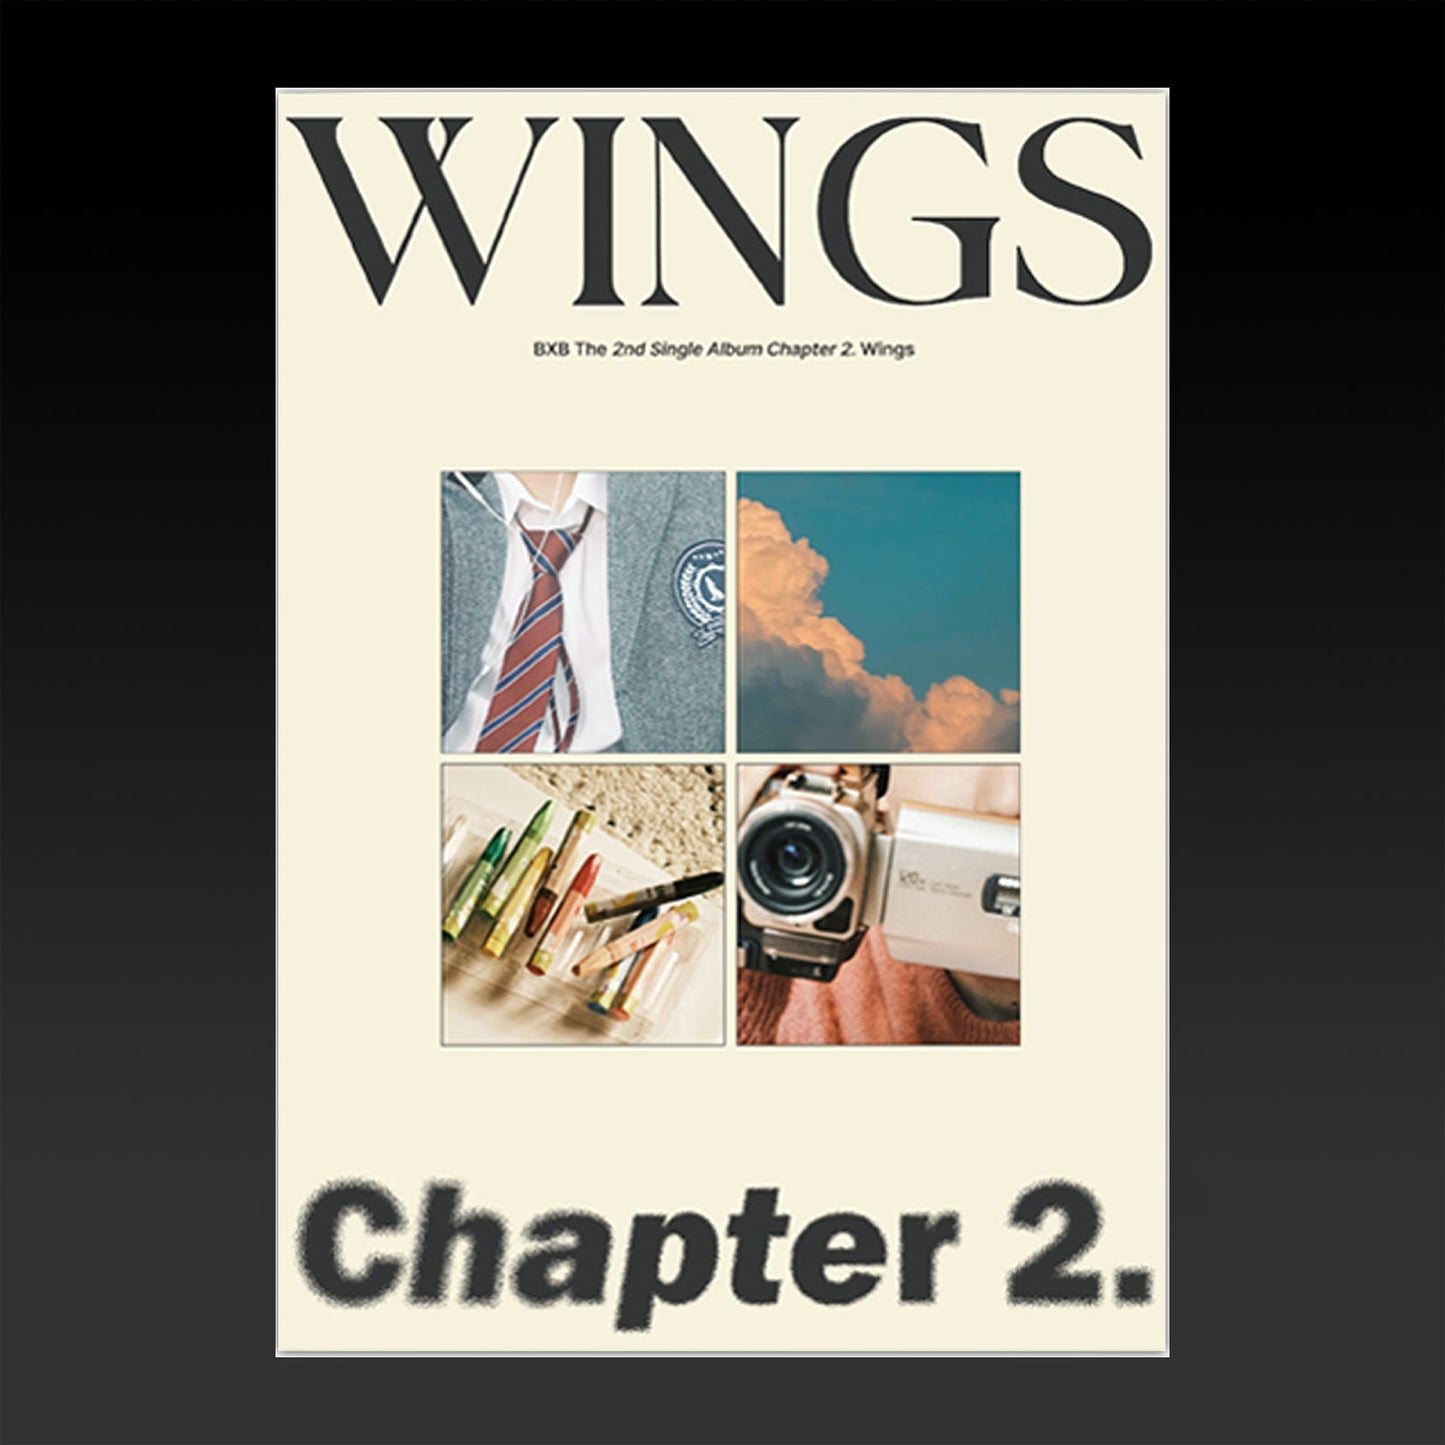 BXB 2ND SINGLE ALBUM 'CHAPTER 2. WINGS' DAY VERSION COVER